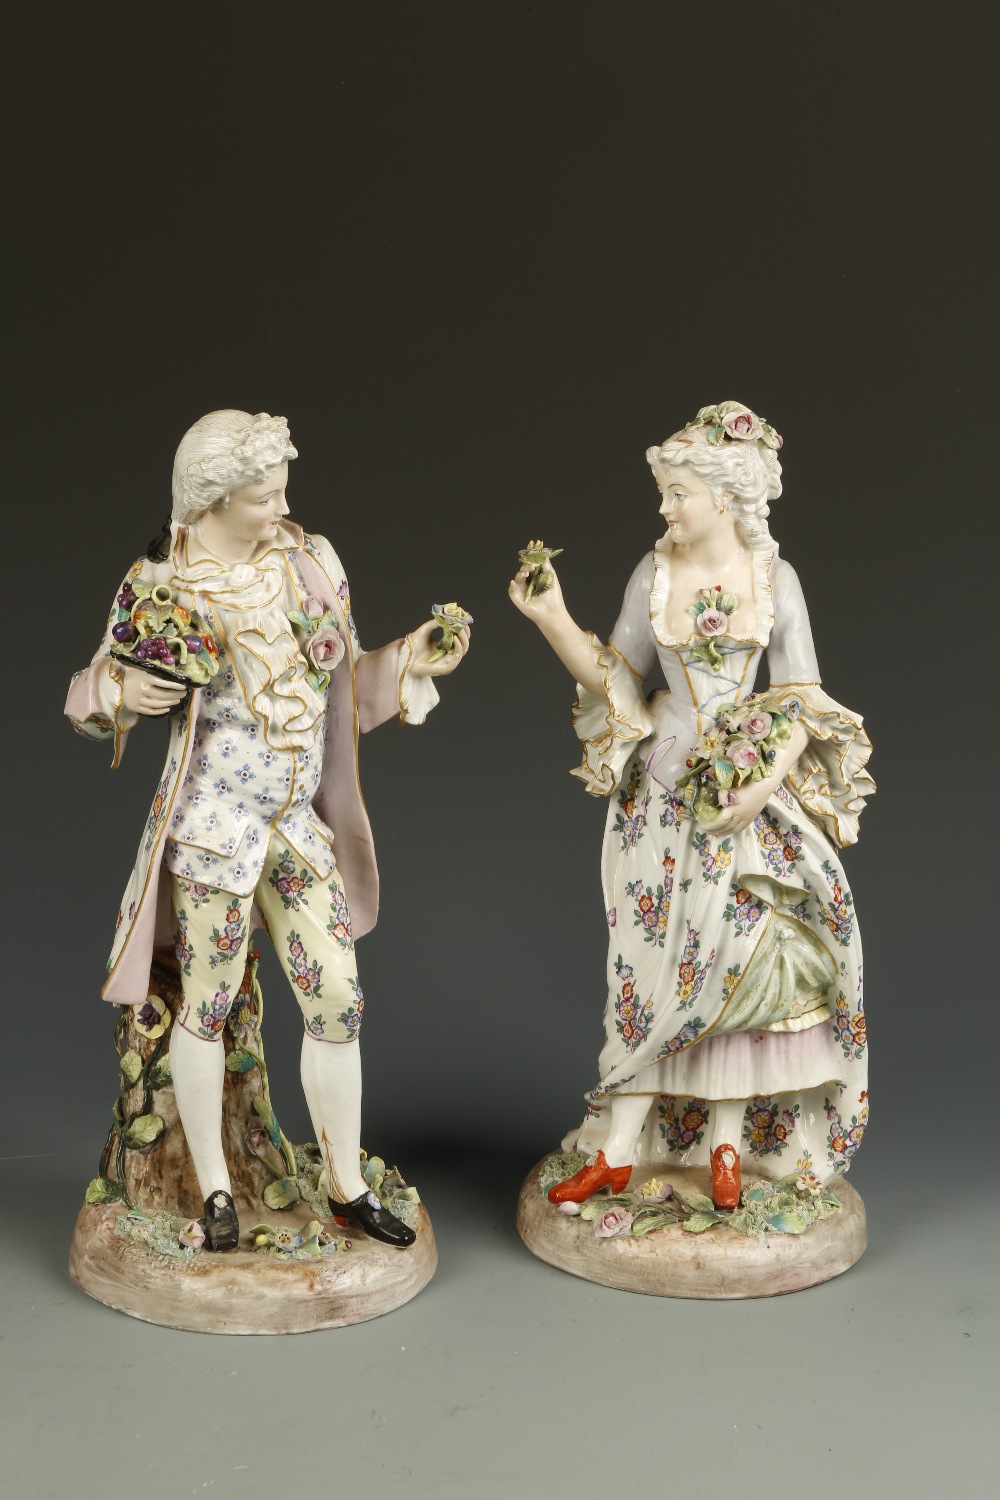 A PAIR OF 19TH CENTURY ""MEISSEN"" FIGURES of a lady and gentleman in floral decorated traditional